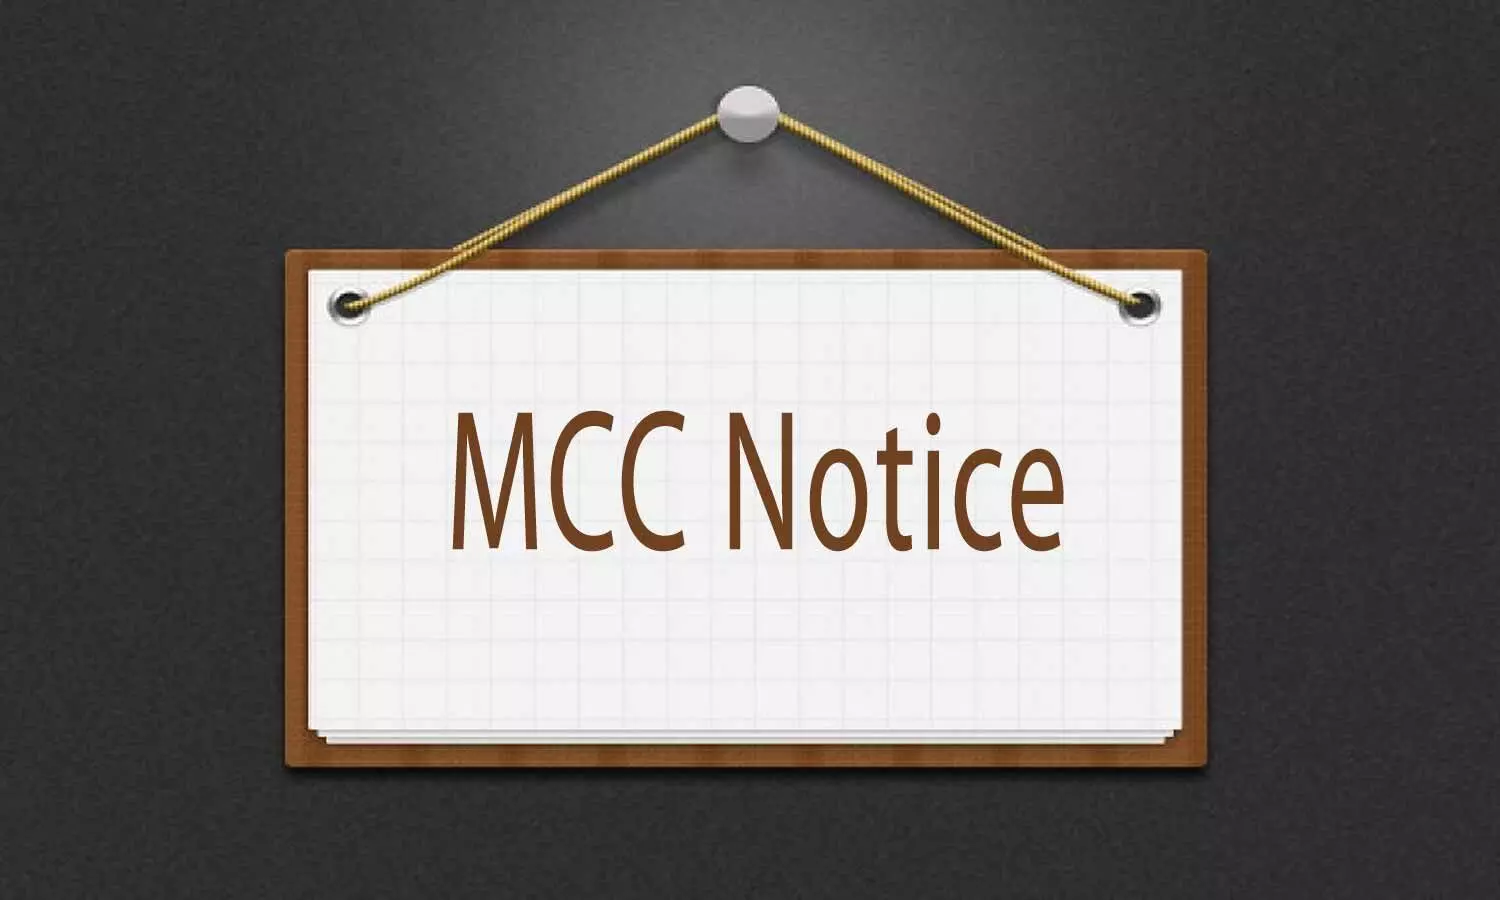 PG Medical Counselling: MCC further extends deadline for Round 1 resignation to June 2020